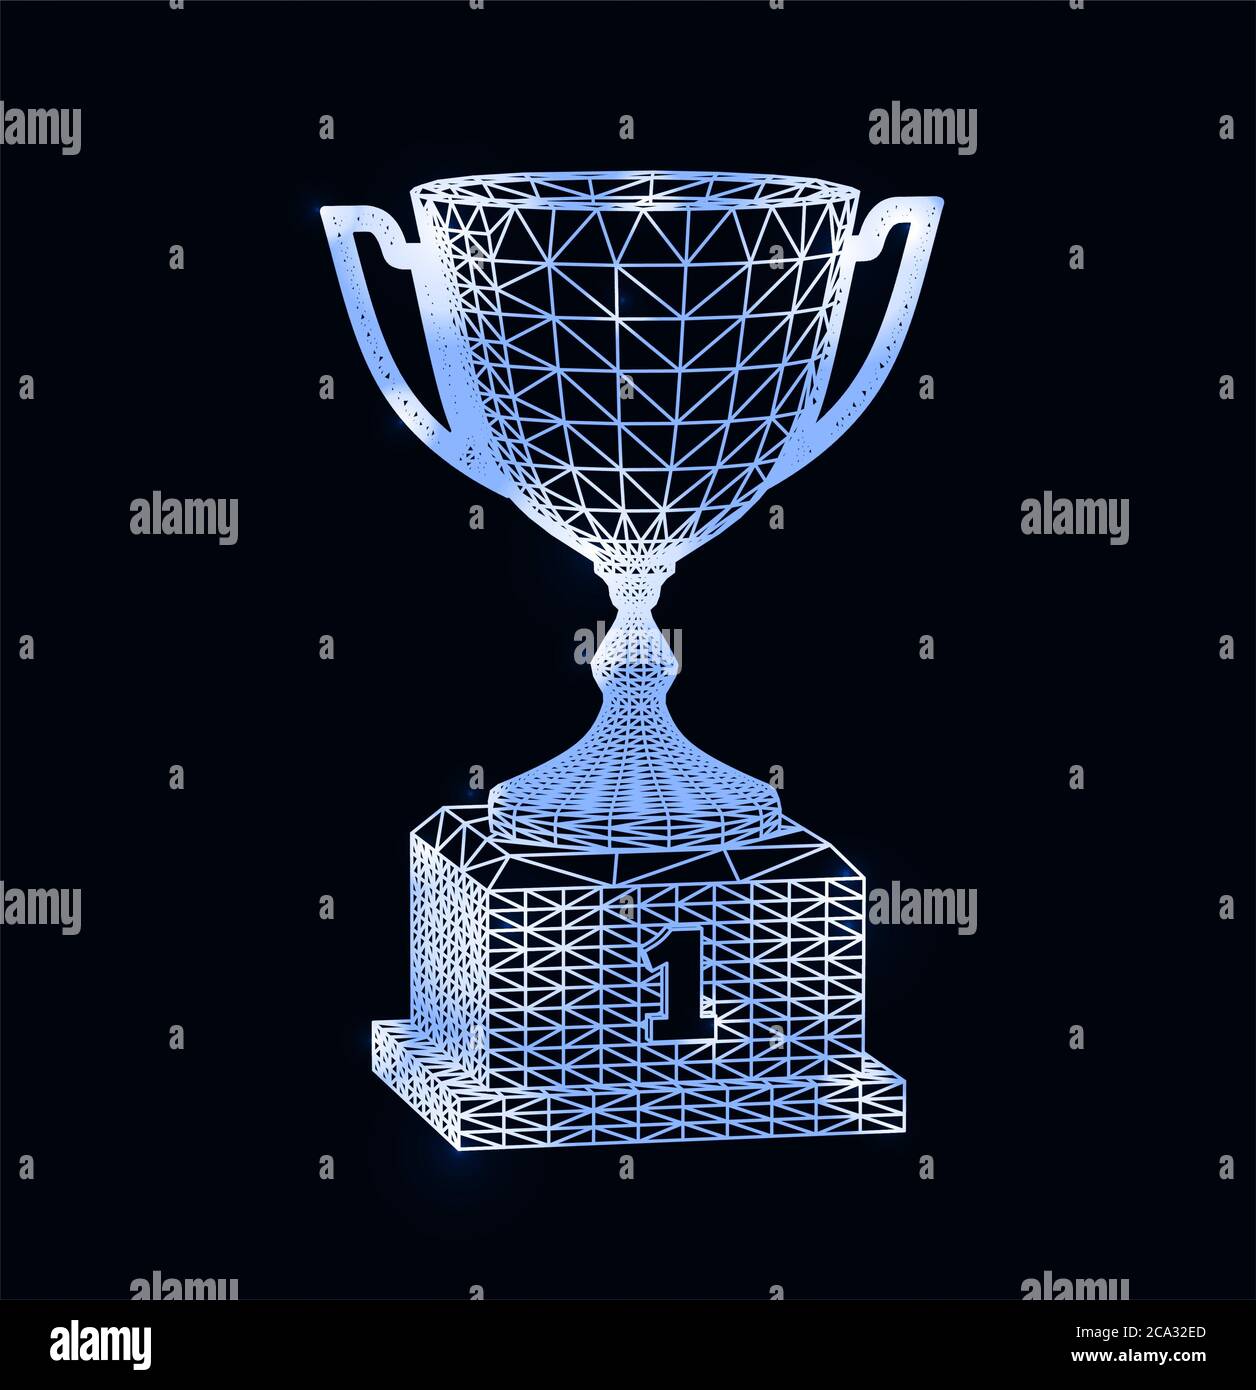 Winning award cup with polygonal grid on dark background. Vector illustration. Stock Photo